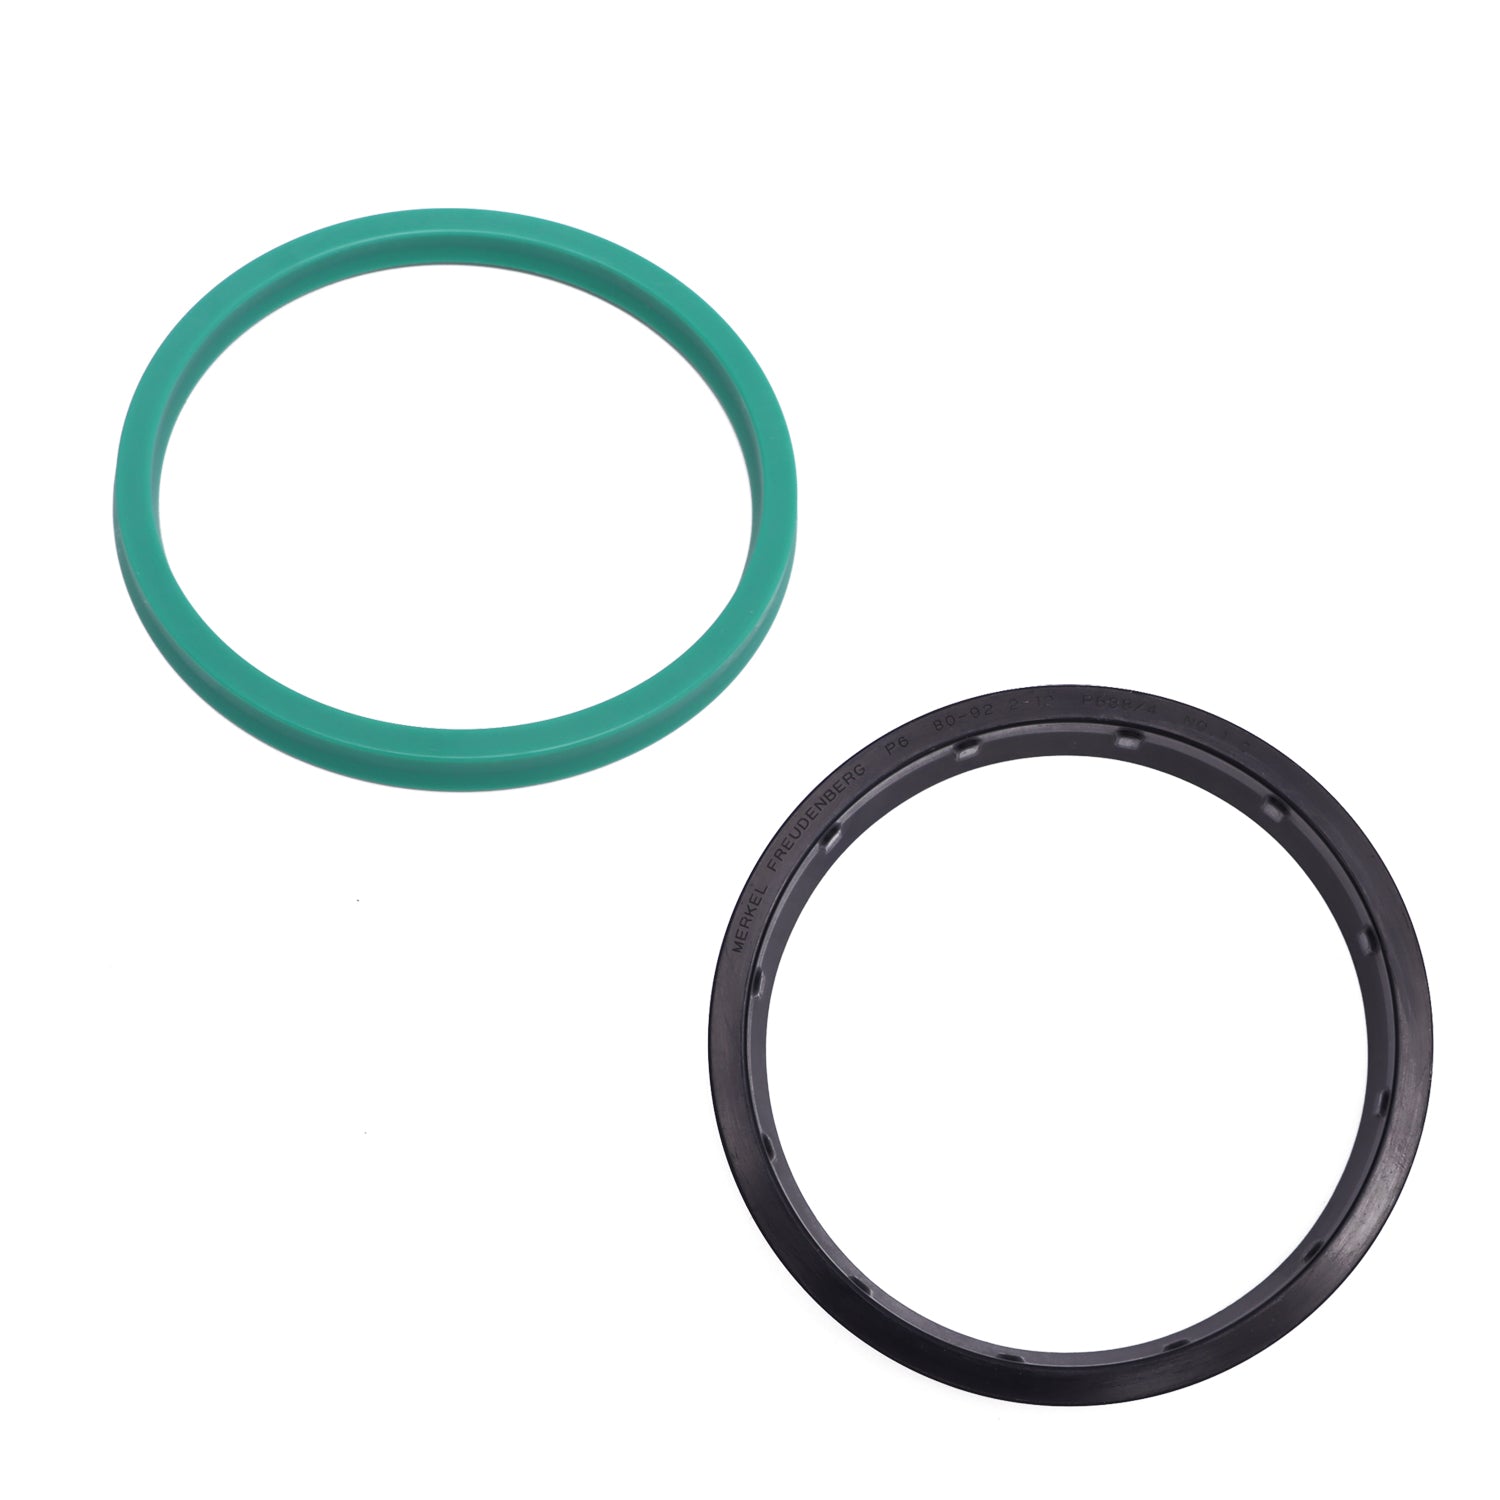 Differential Cylinder 10040856 (DN 80/50) Seal Kit for Schwing Stationary Concrete Pump, Hydraulic Main Oil Cylinder Sealing Kit for Schwing Stetter Concrete Pump - KUDUPARTS